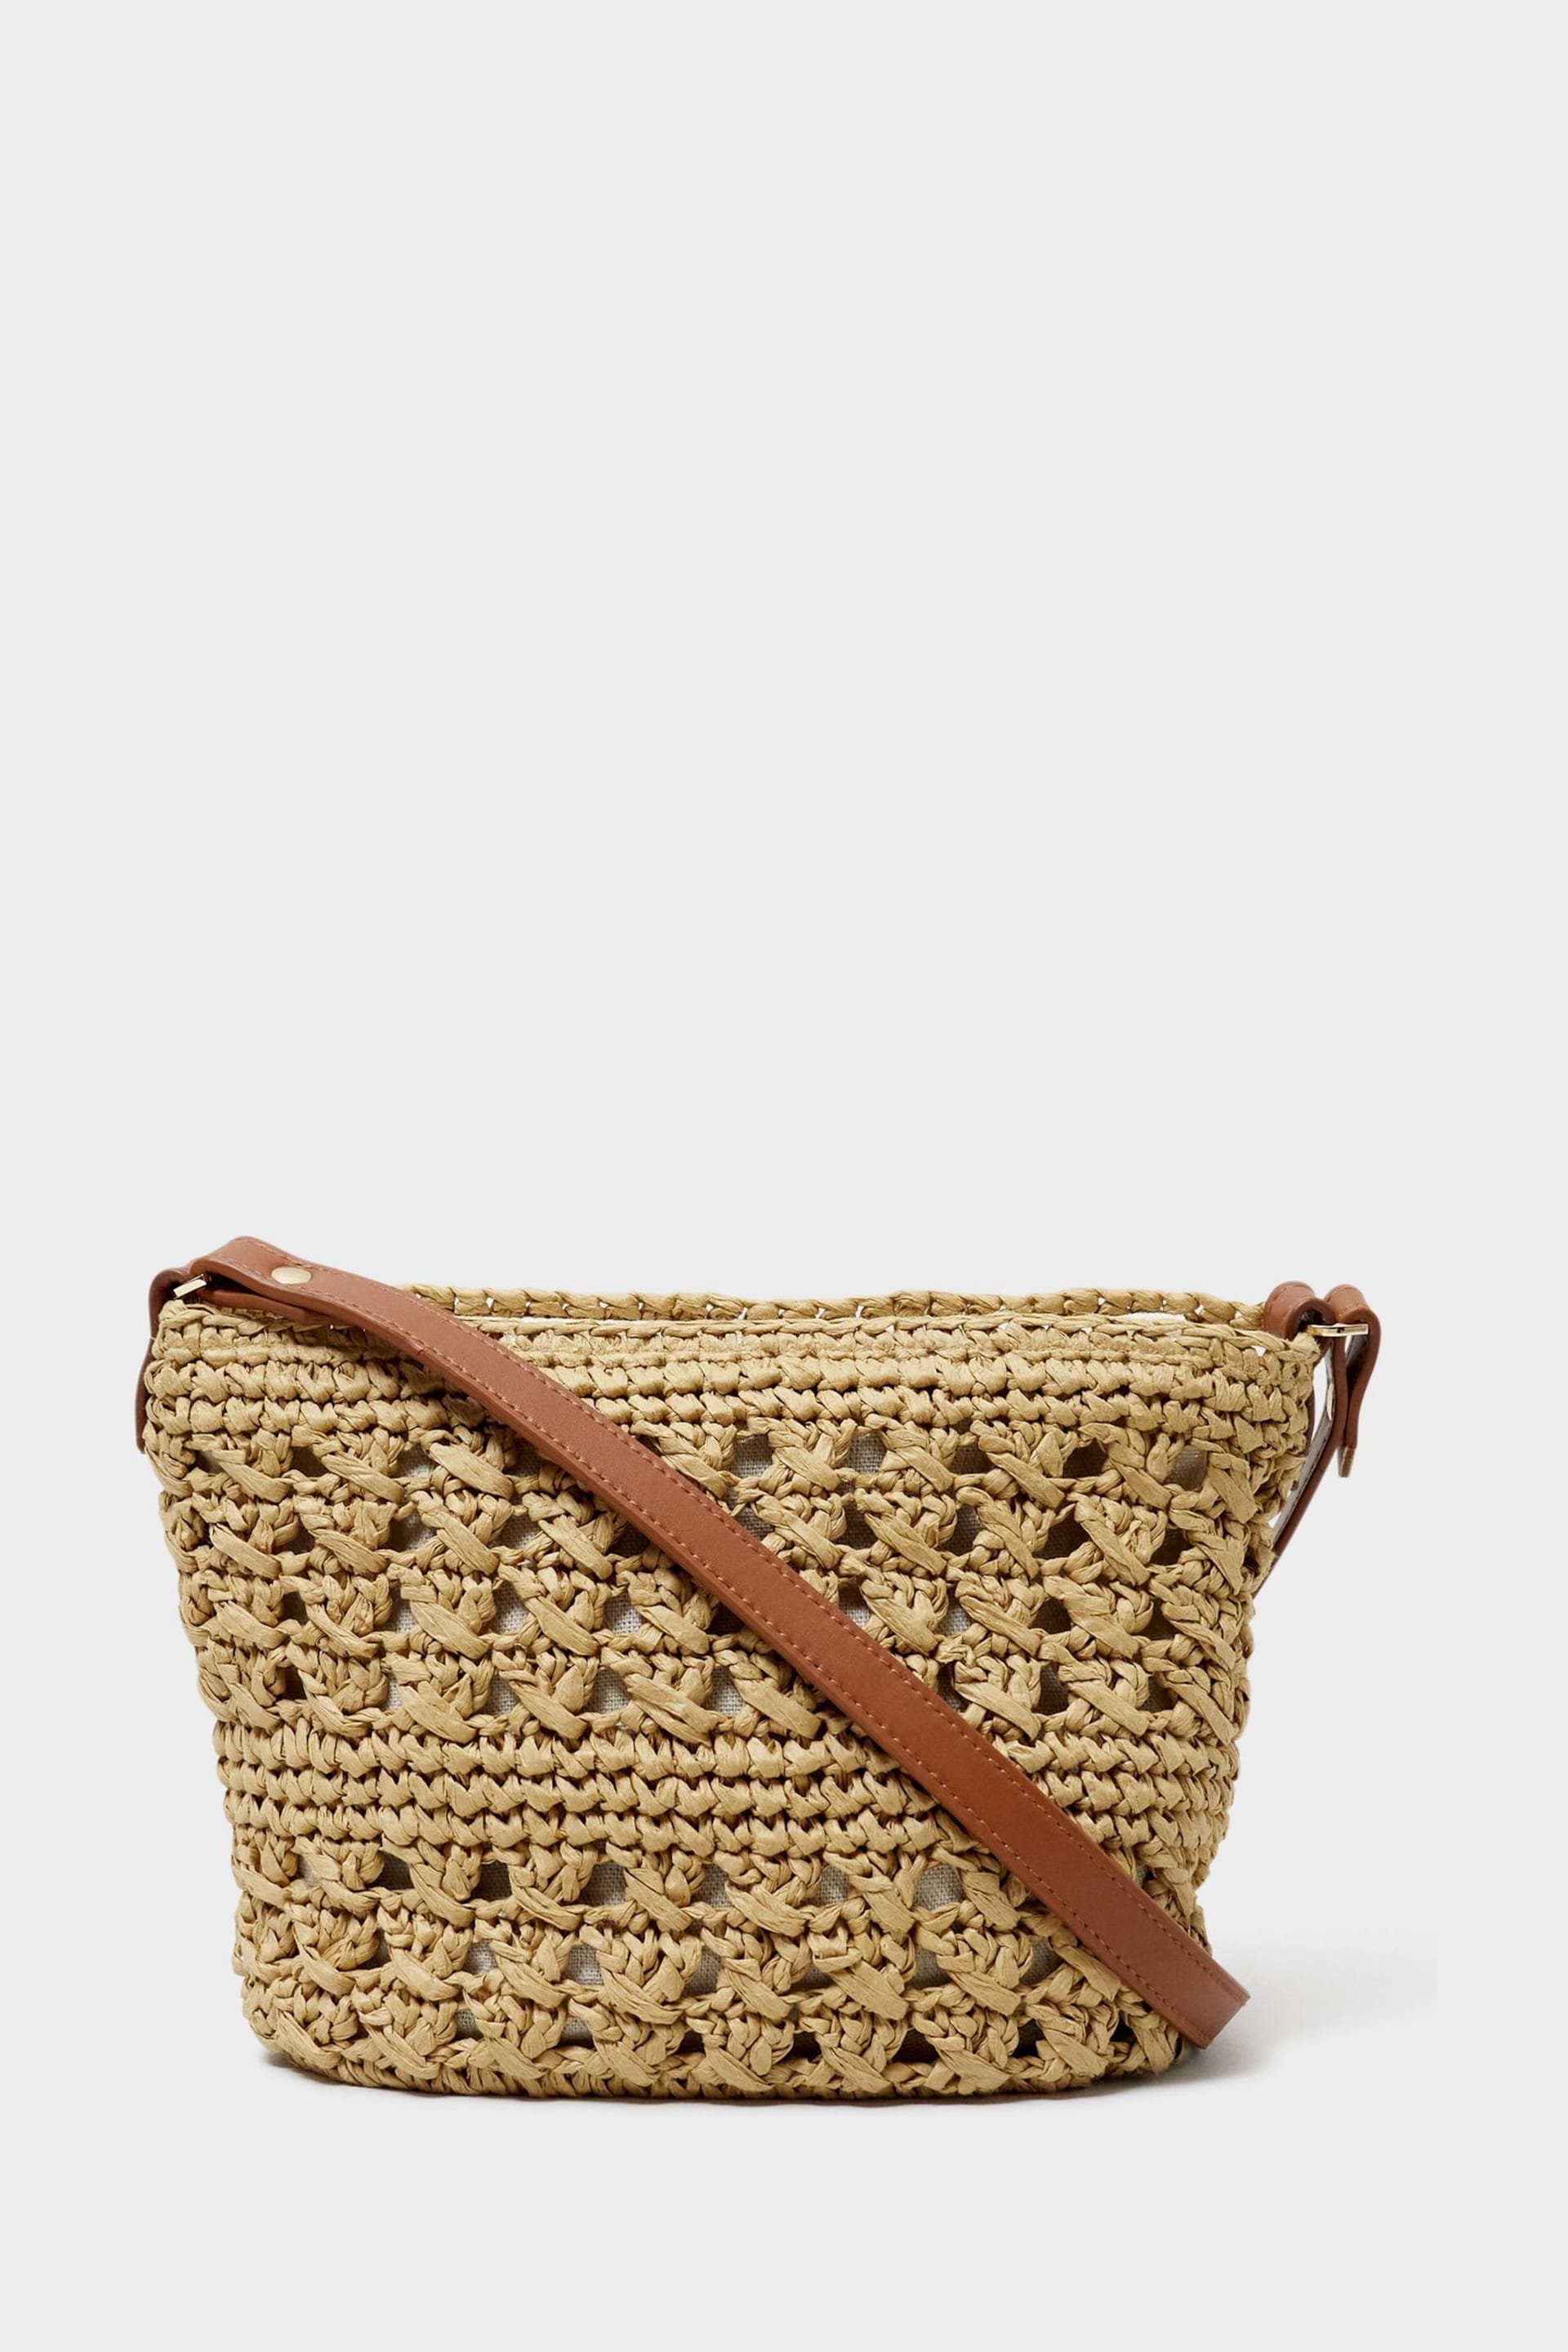 Crew Clothing Company Natural Textured  Beach Bag - Image 6 of 7